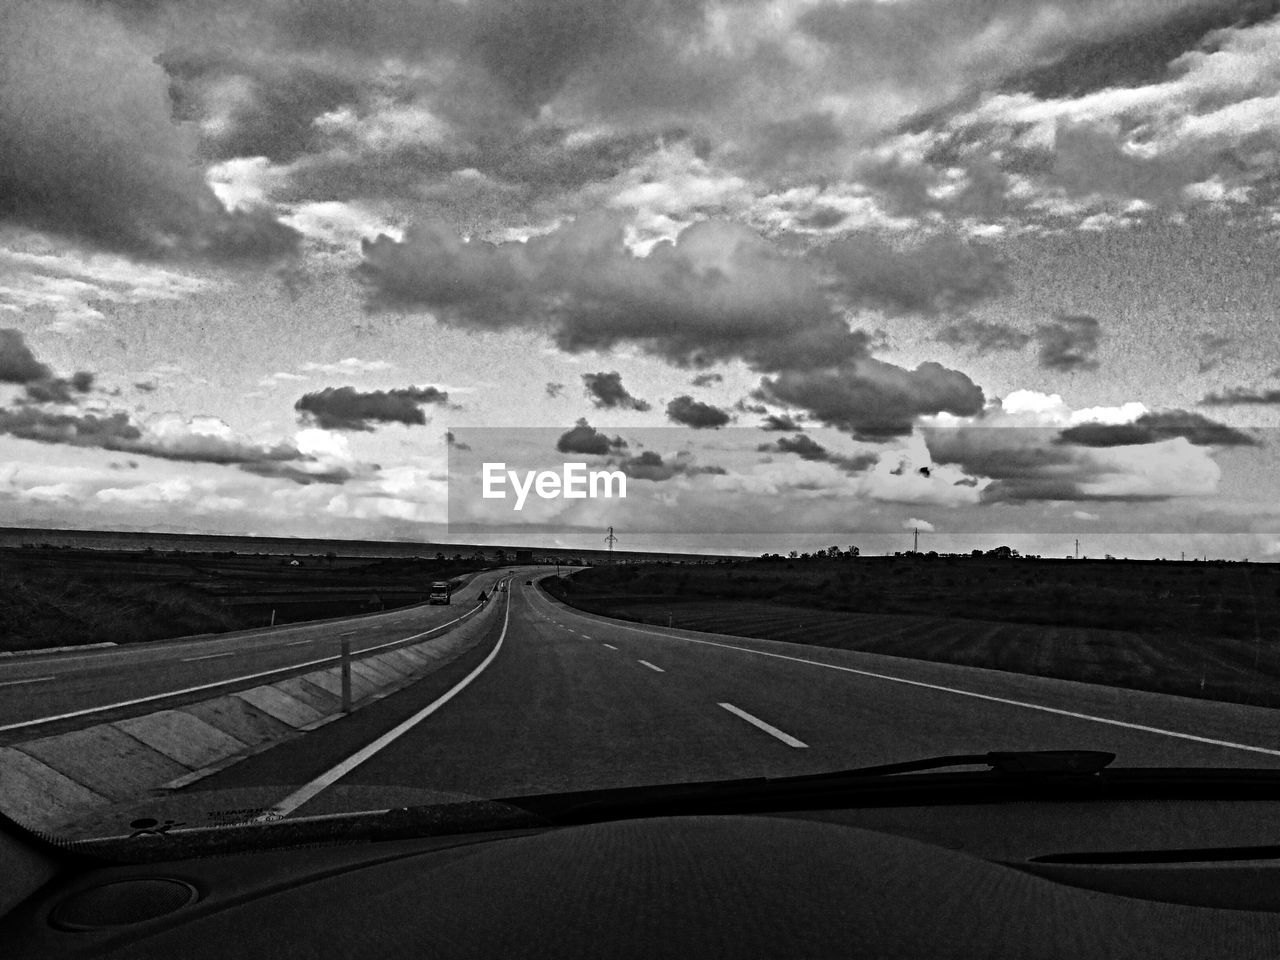 View of road seen through car windshield